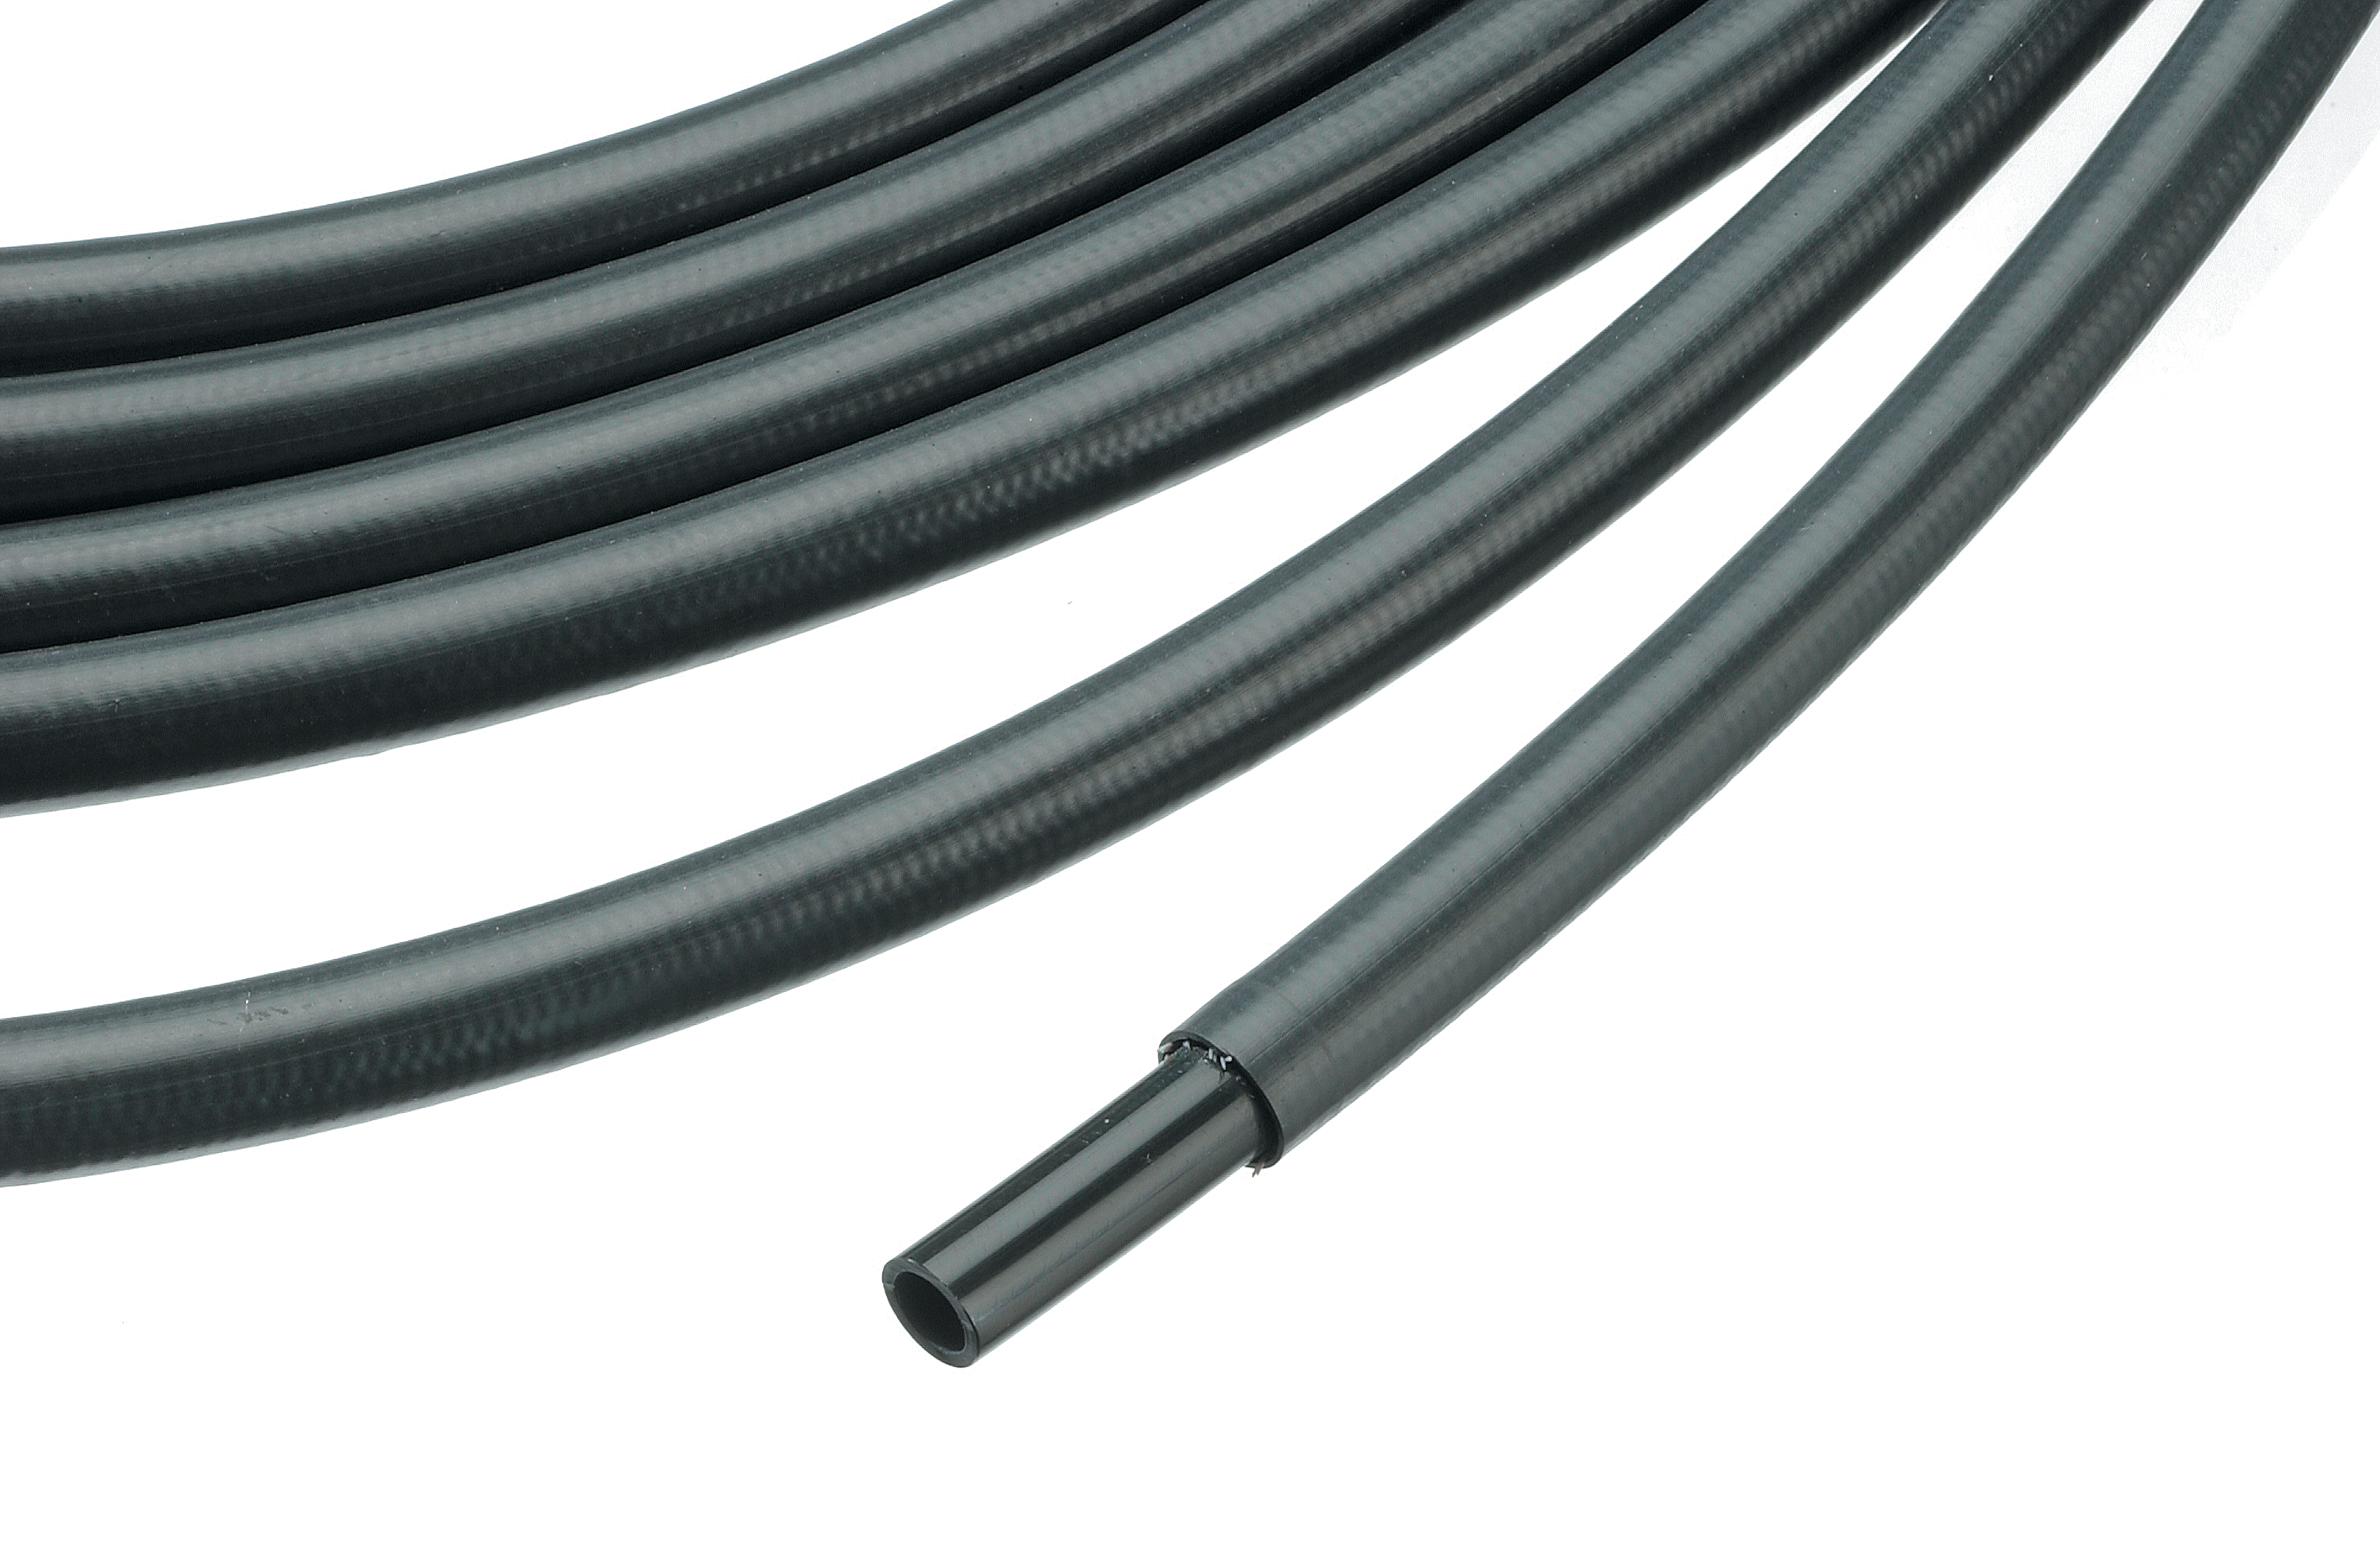 Triple layer anti-spark coated polyamide tubes (25 m coil) Polyamide hoses (PA)